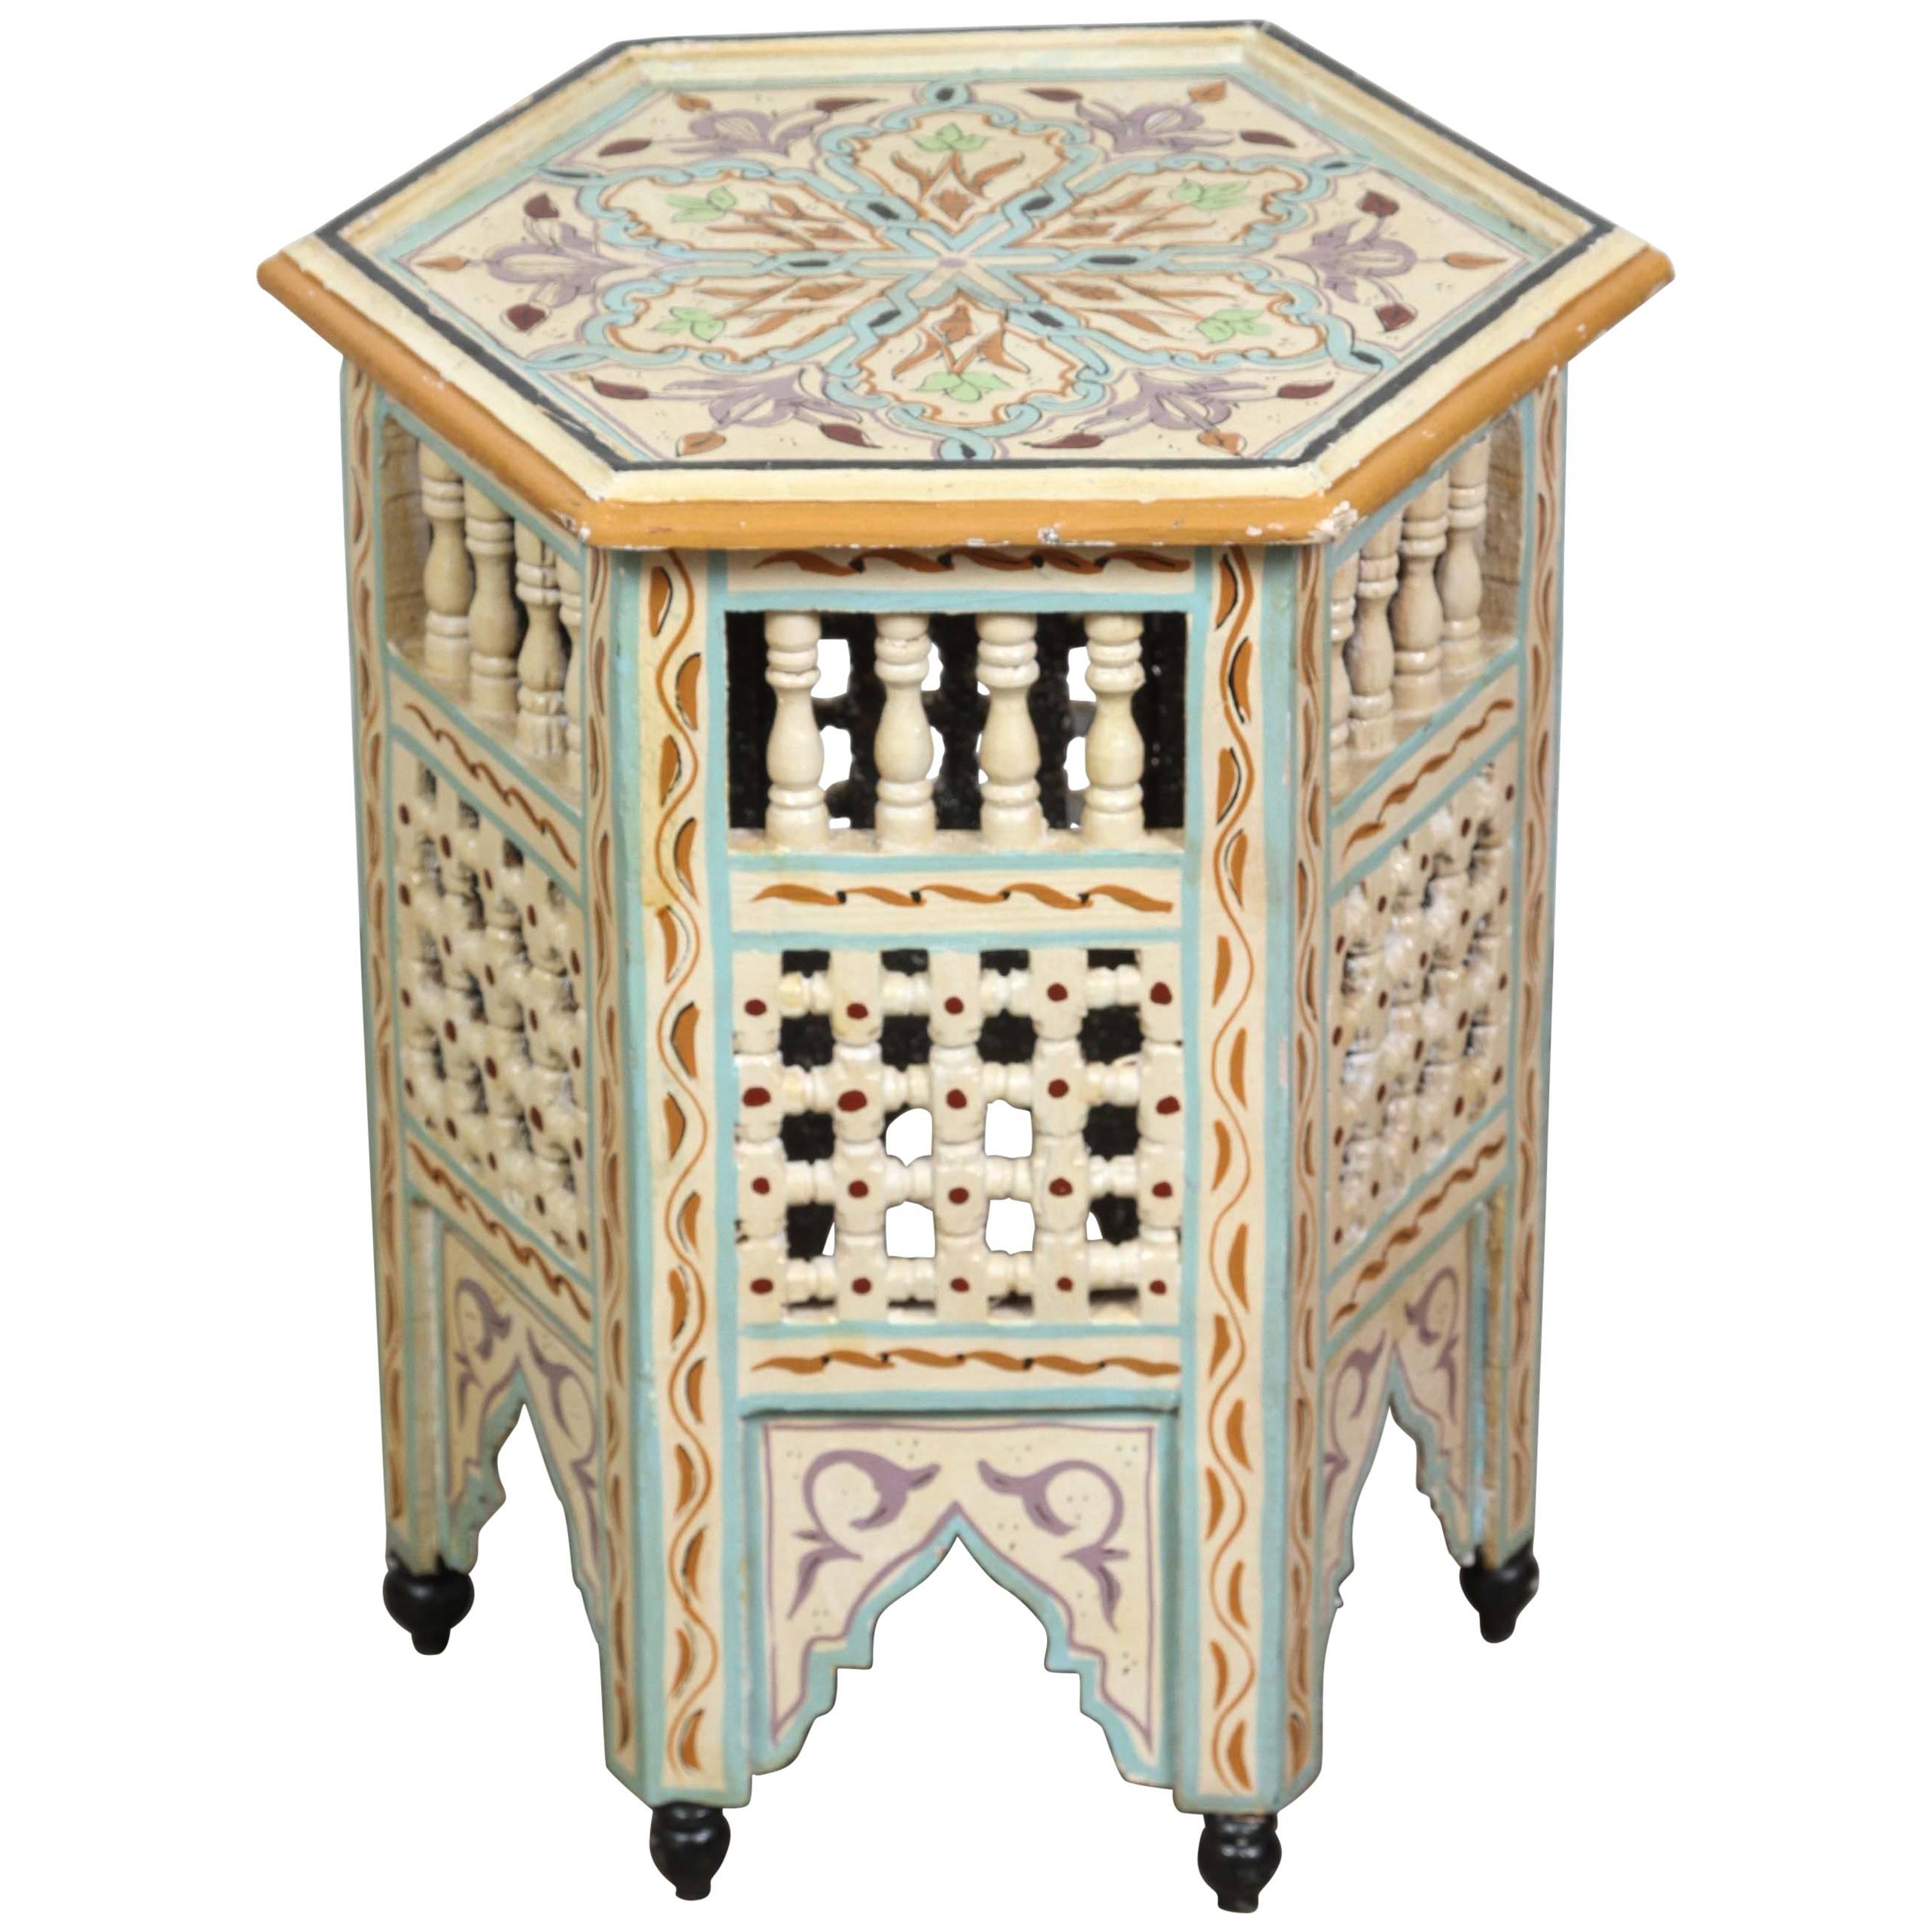 Moroccan Side Table Hand-Painted in Ivory and Blue Colors